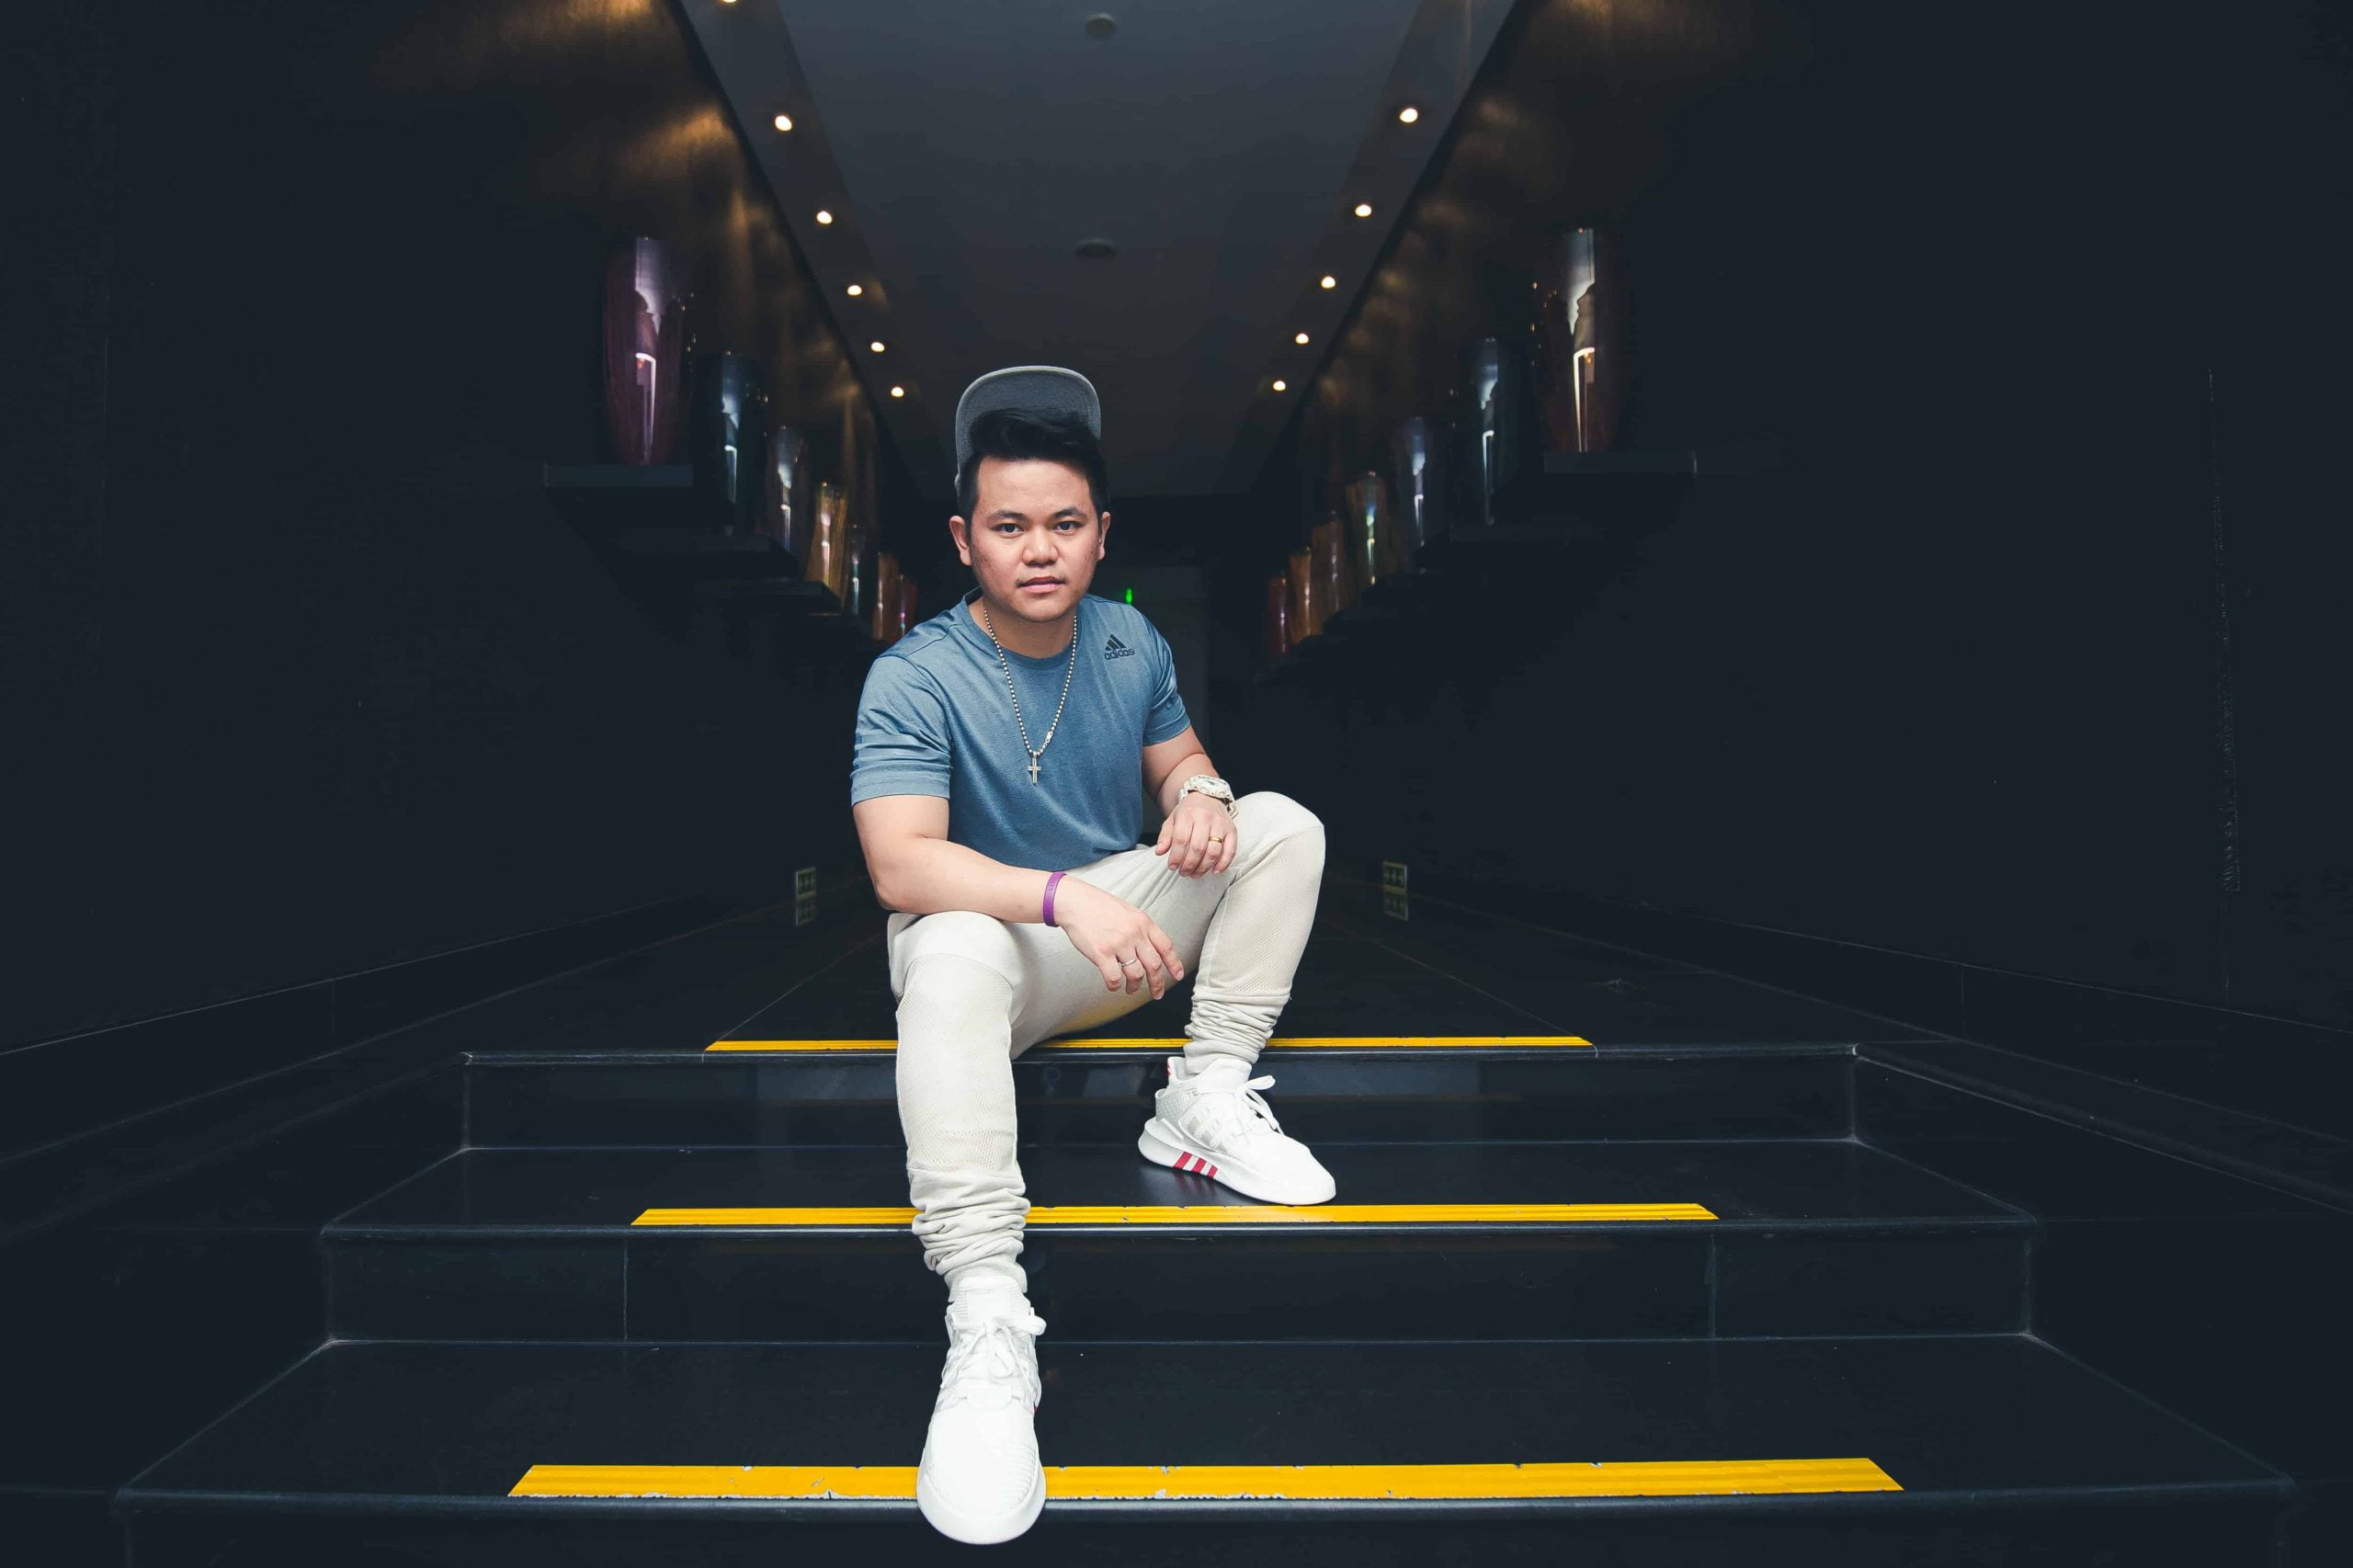 DJ Felix opens up about his inspiration and plans for the future [Exclusive Interview]